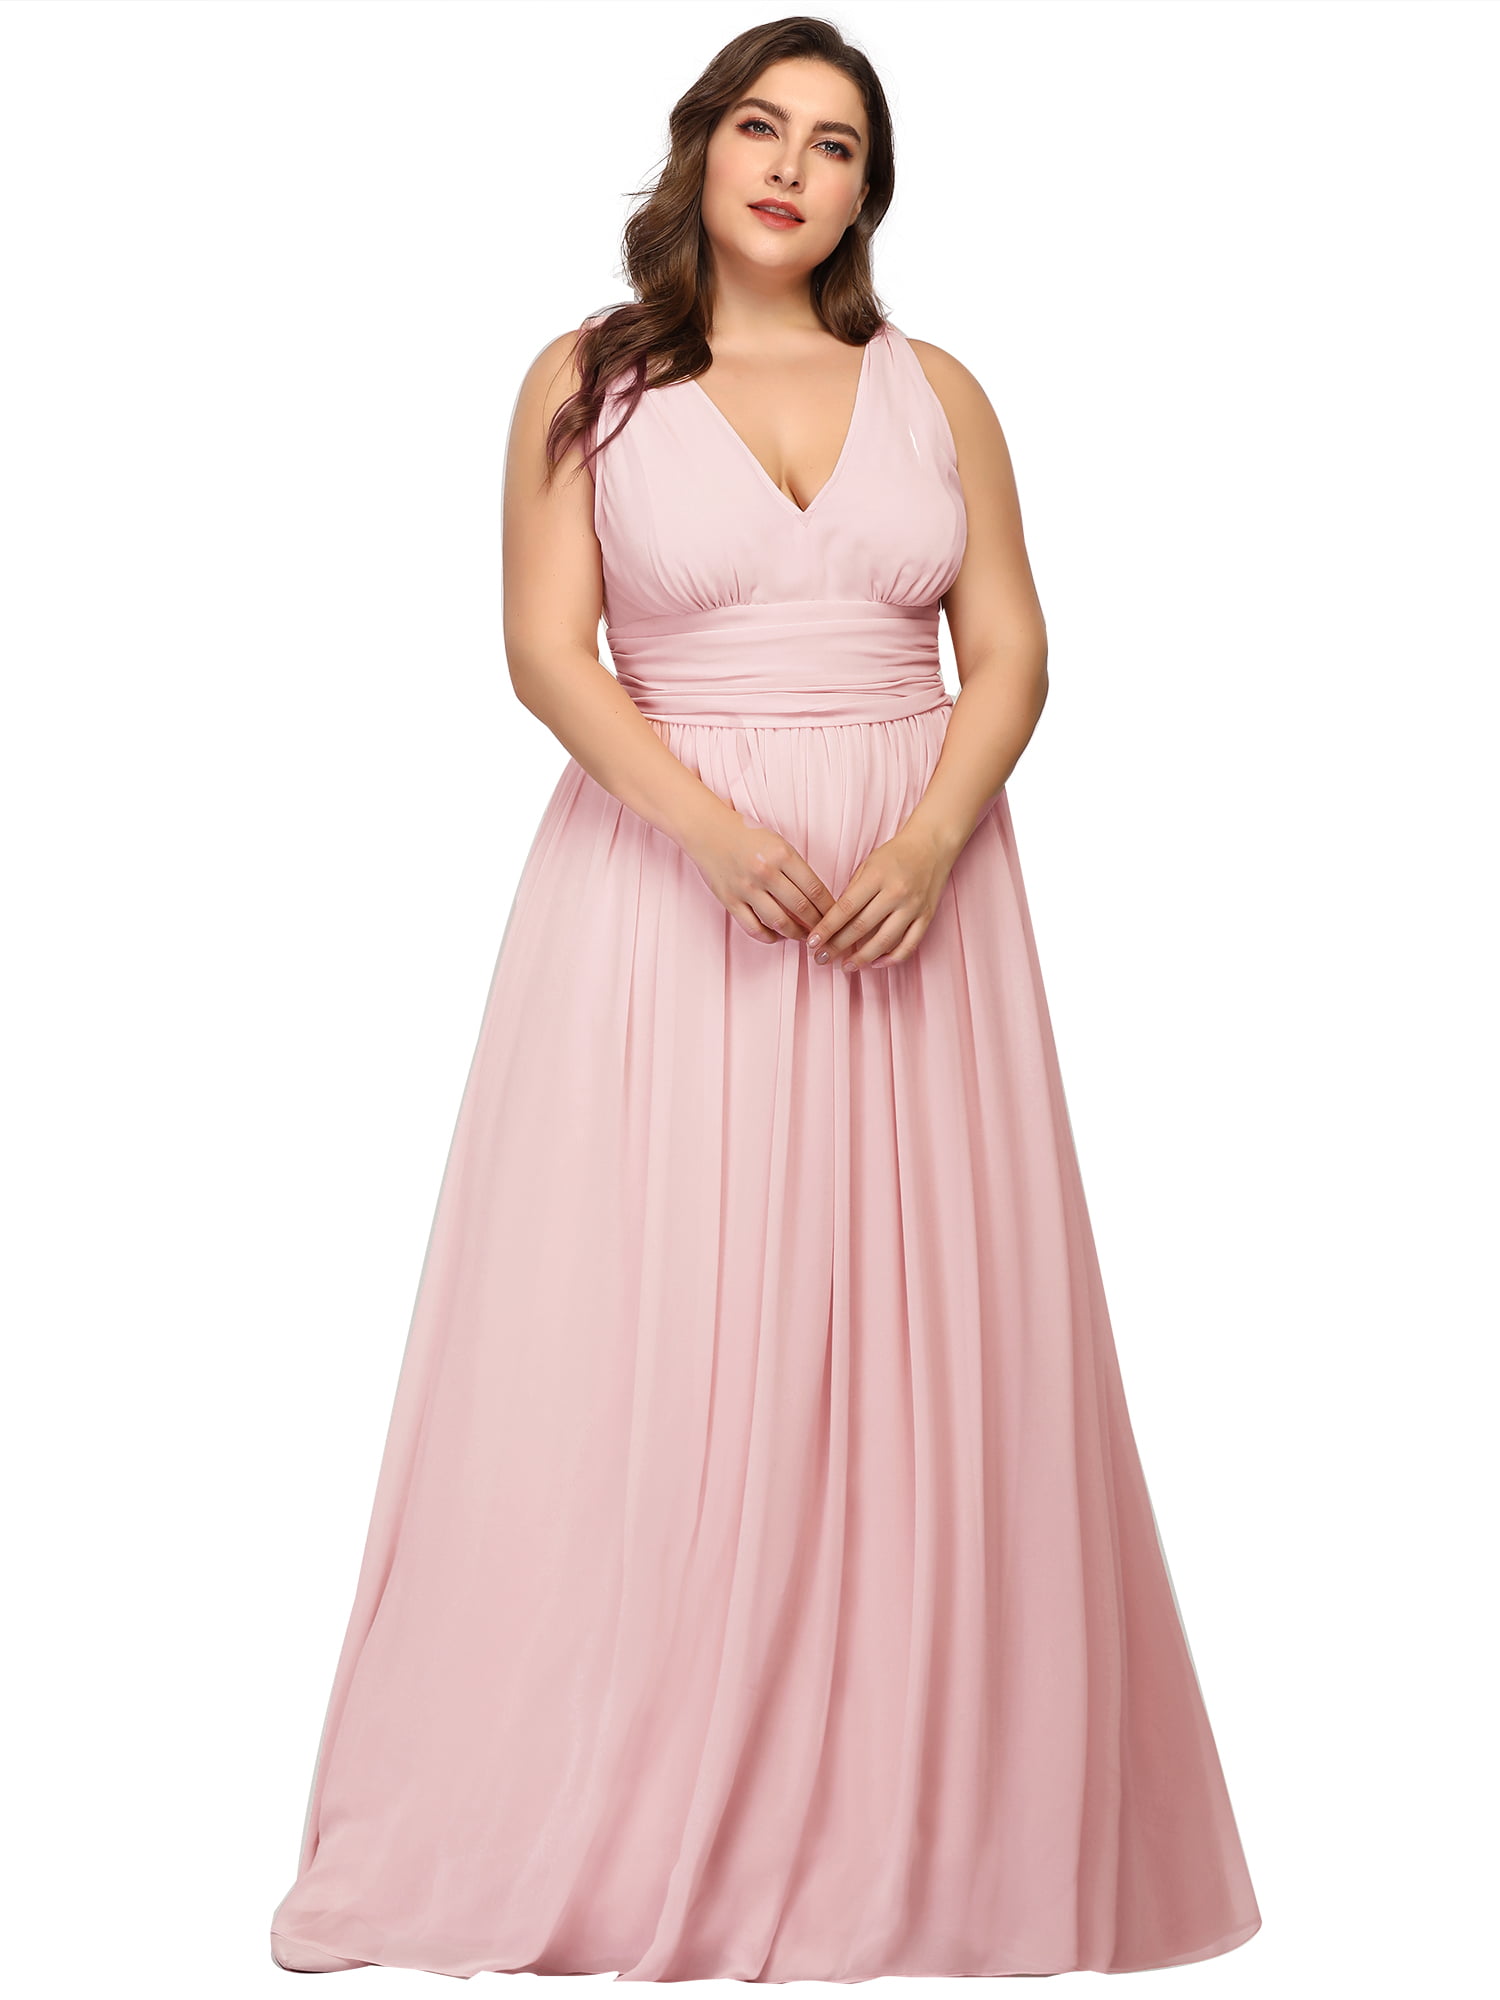 Now and Forever Womens V-Neck Bridesmaid Dress Long Formal Pleated A-line Chiffon Evening Gown with Belt 